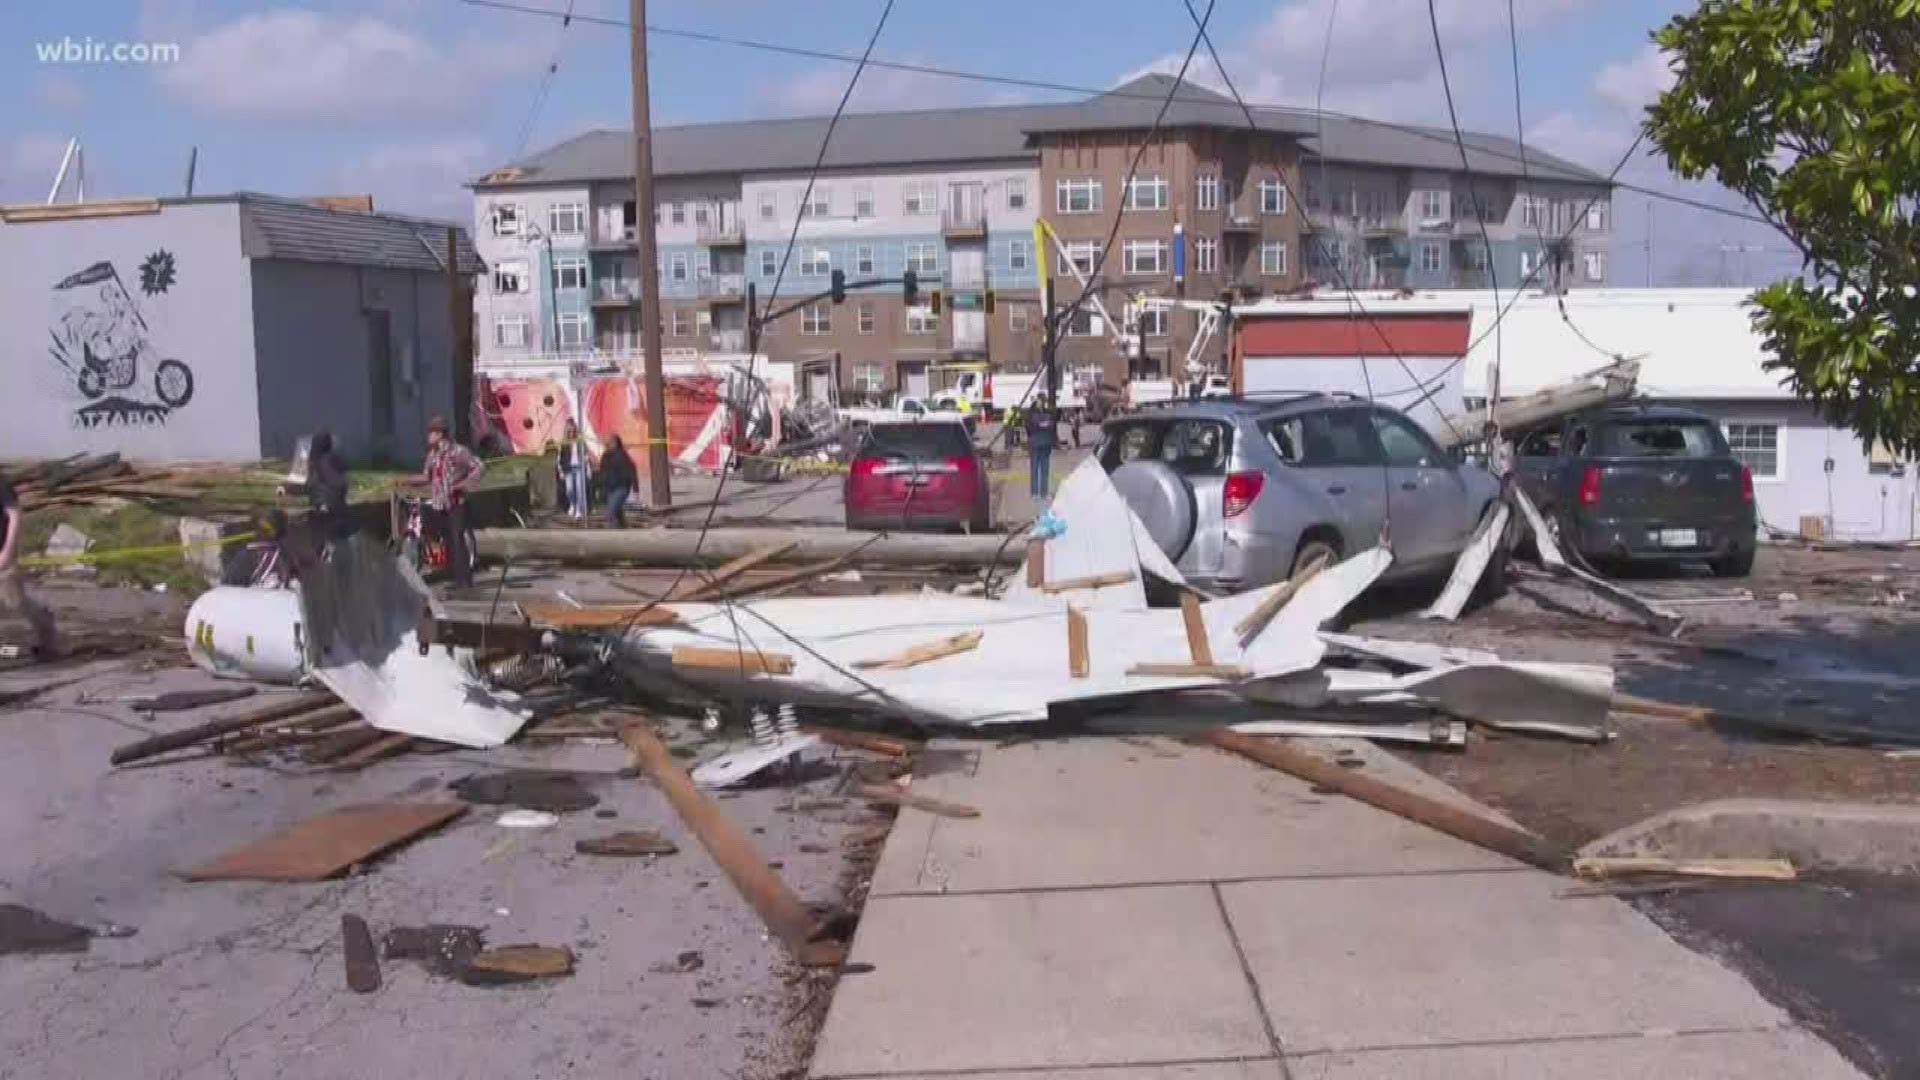 At least 25 dead after tornadoes sweep through Middle Tennessee